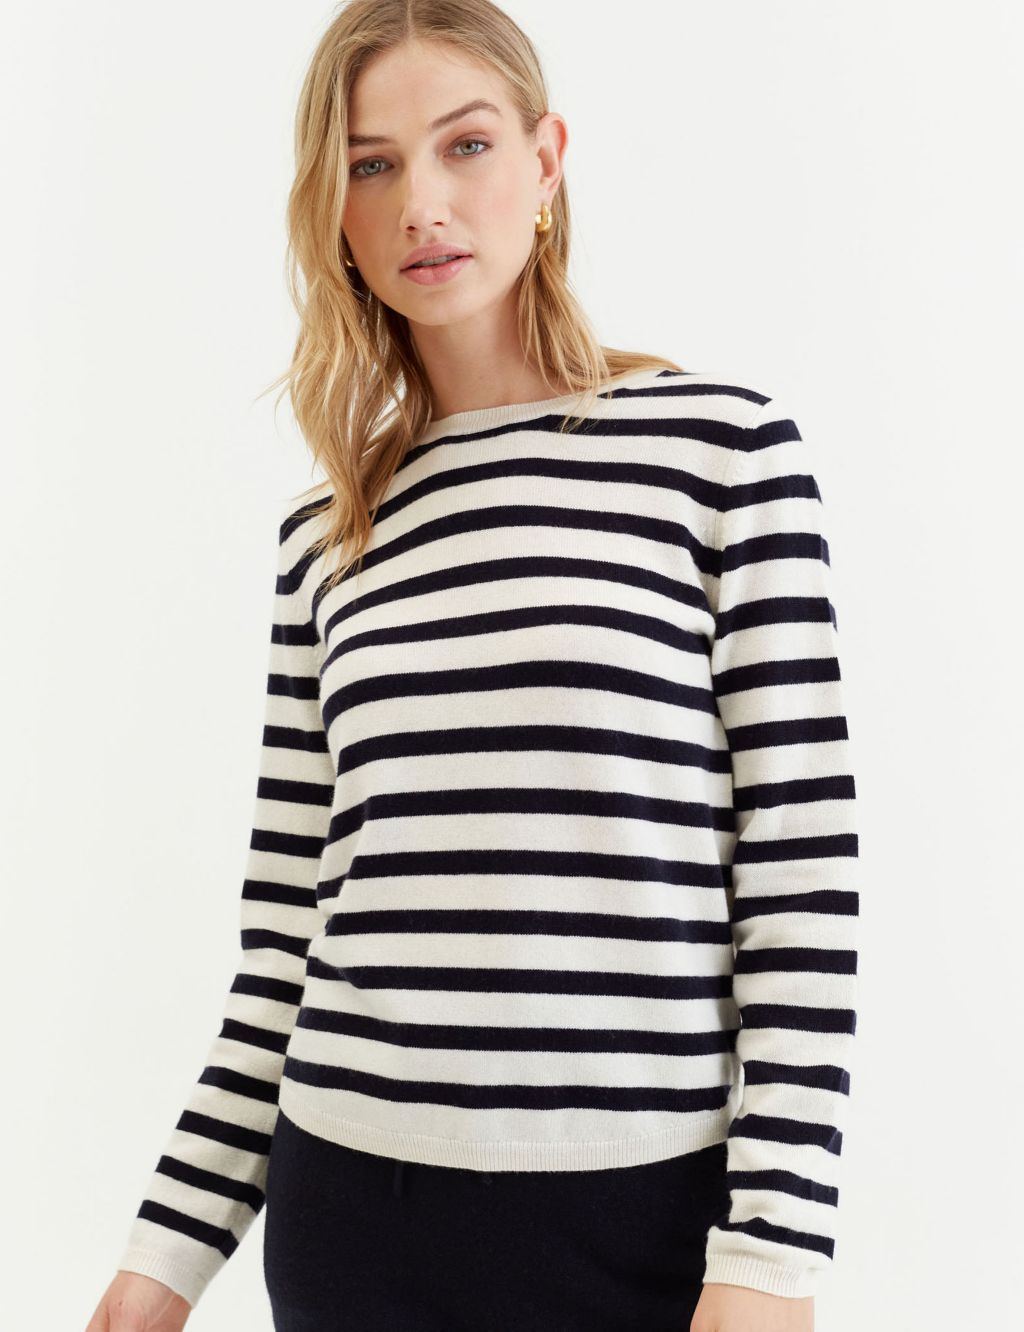 Buy Wool Rich Striped Sweatshirt with Cashmere | Chinti & Parker | M&S